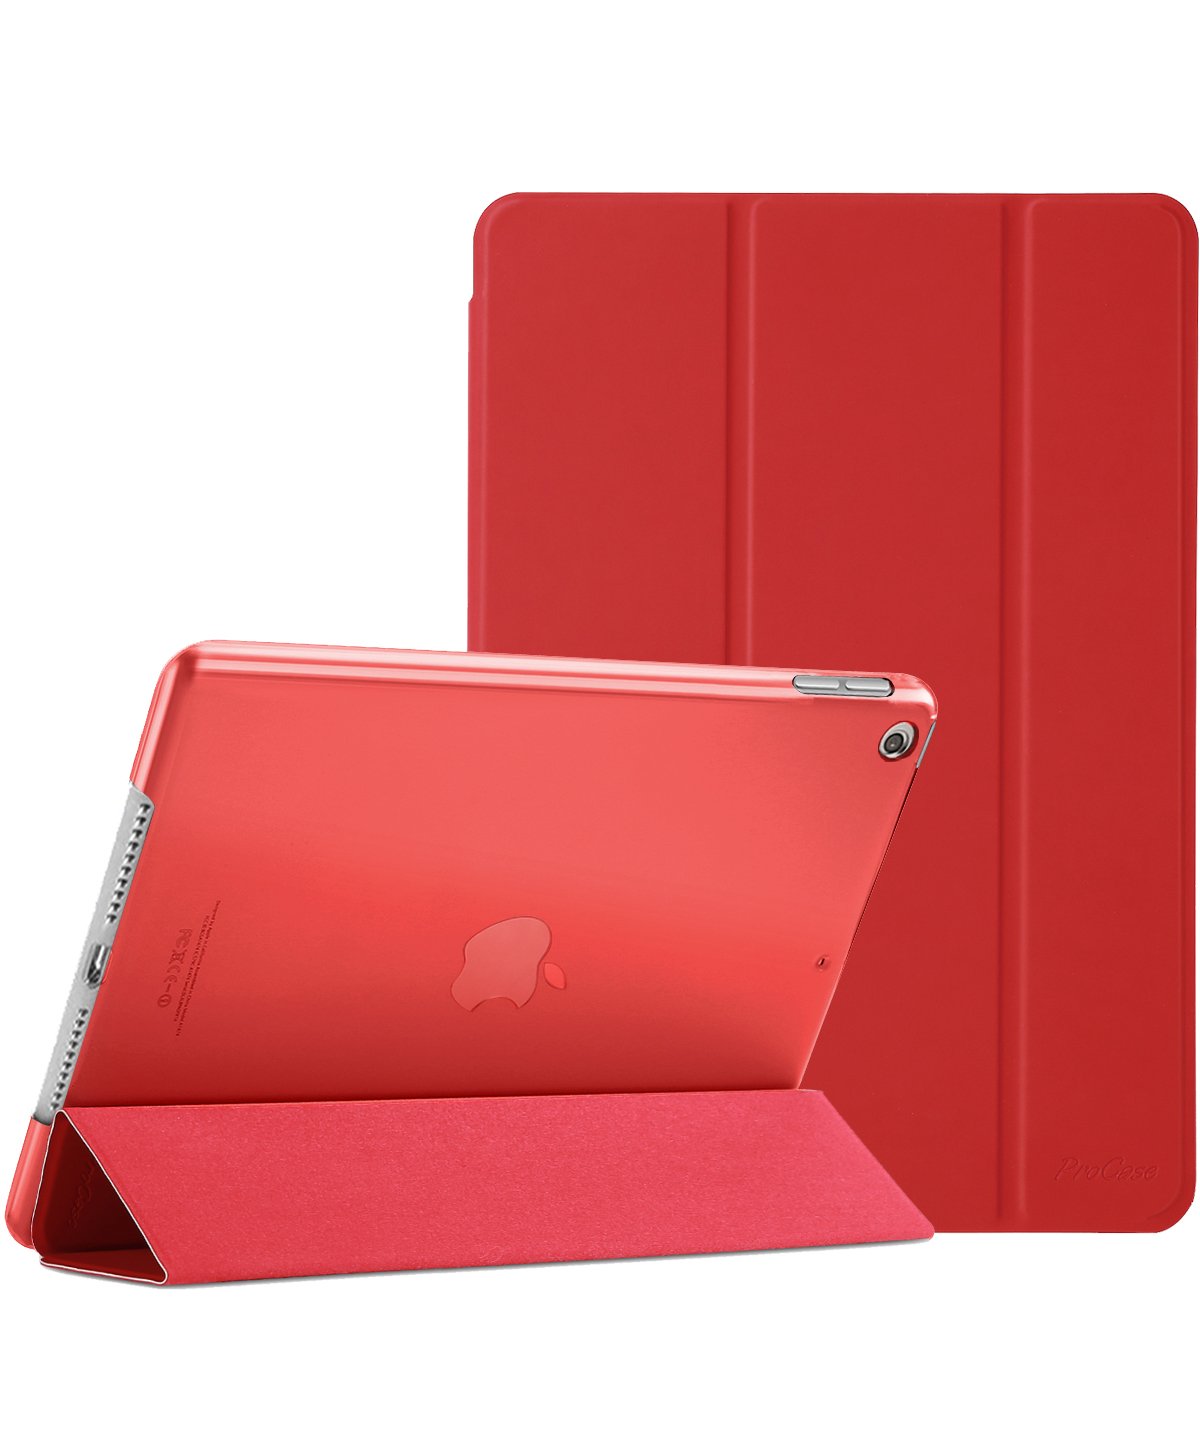  ProCase for iPad Pro 11 Inch Case 2022 2021 2020 2018